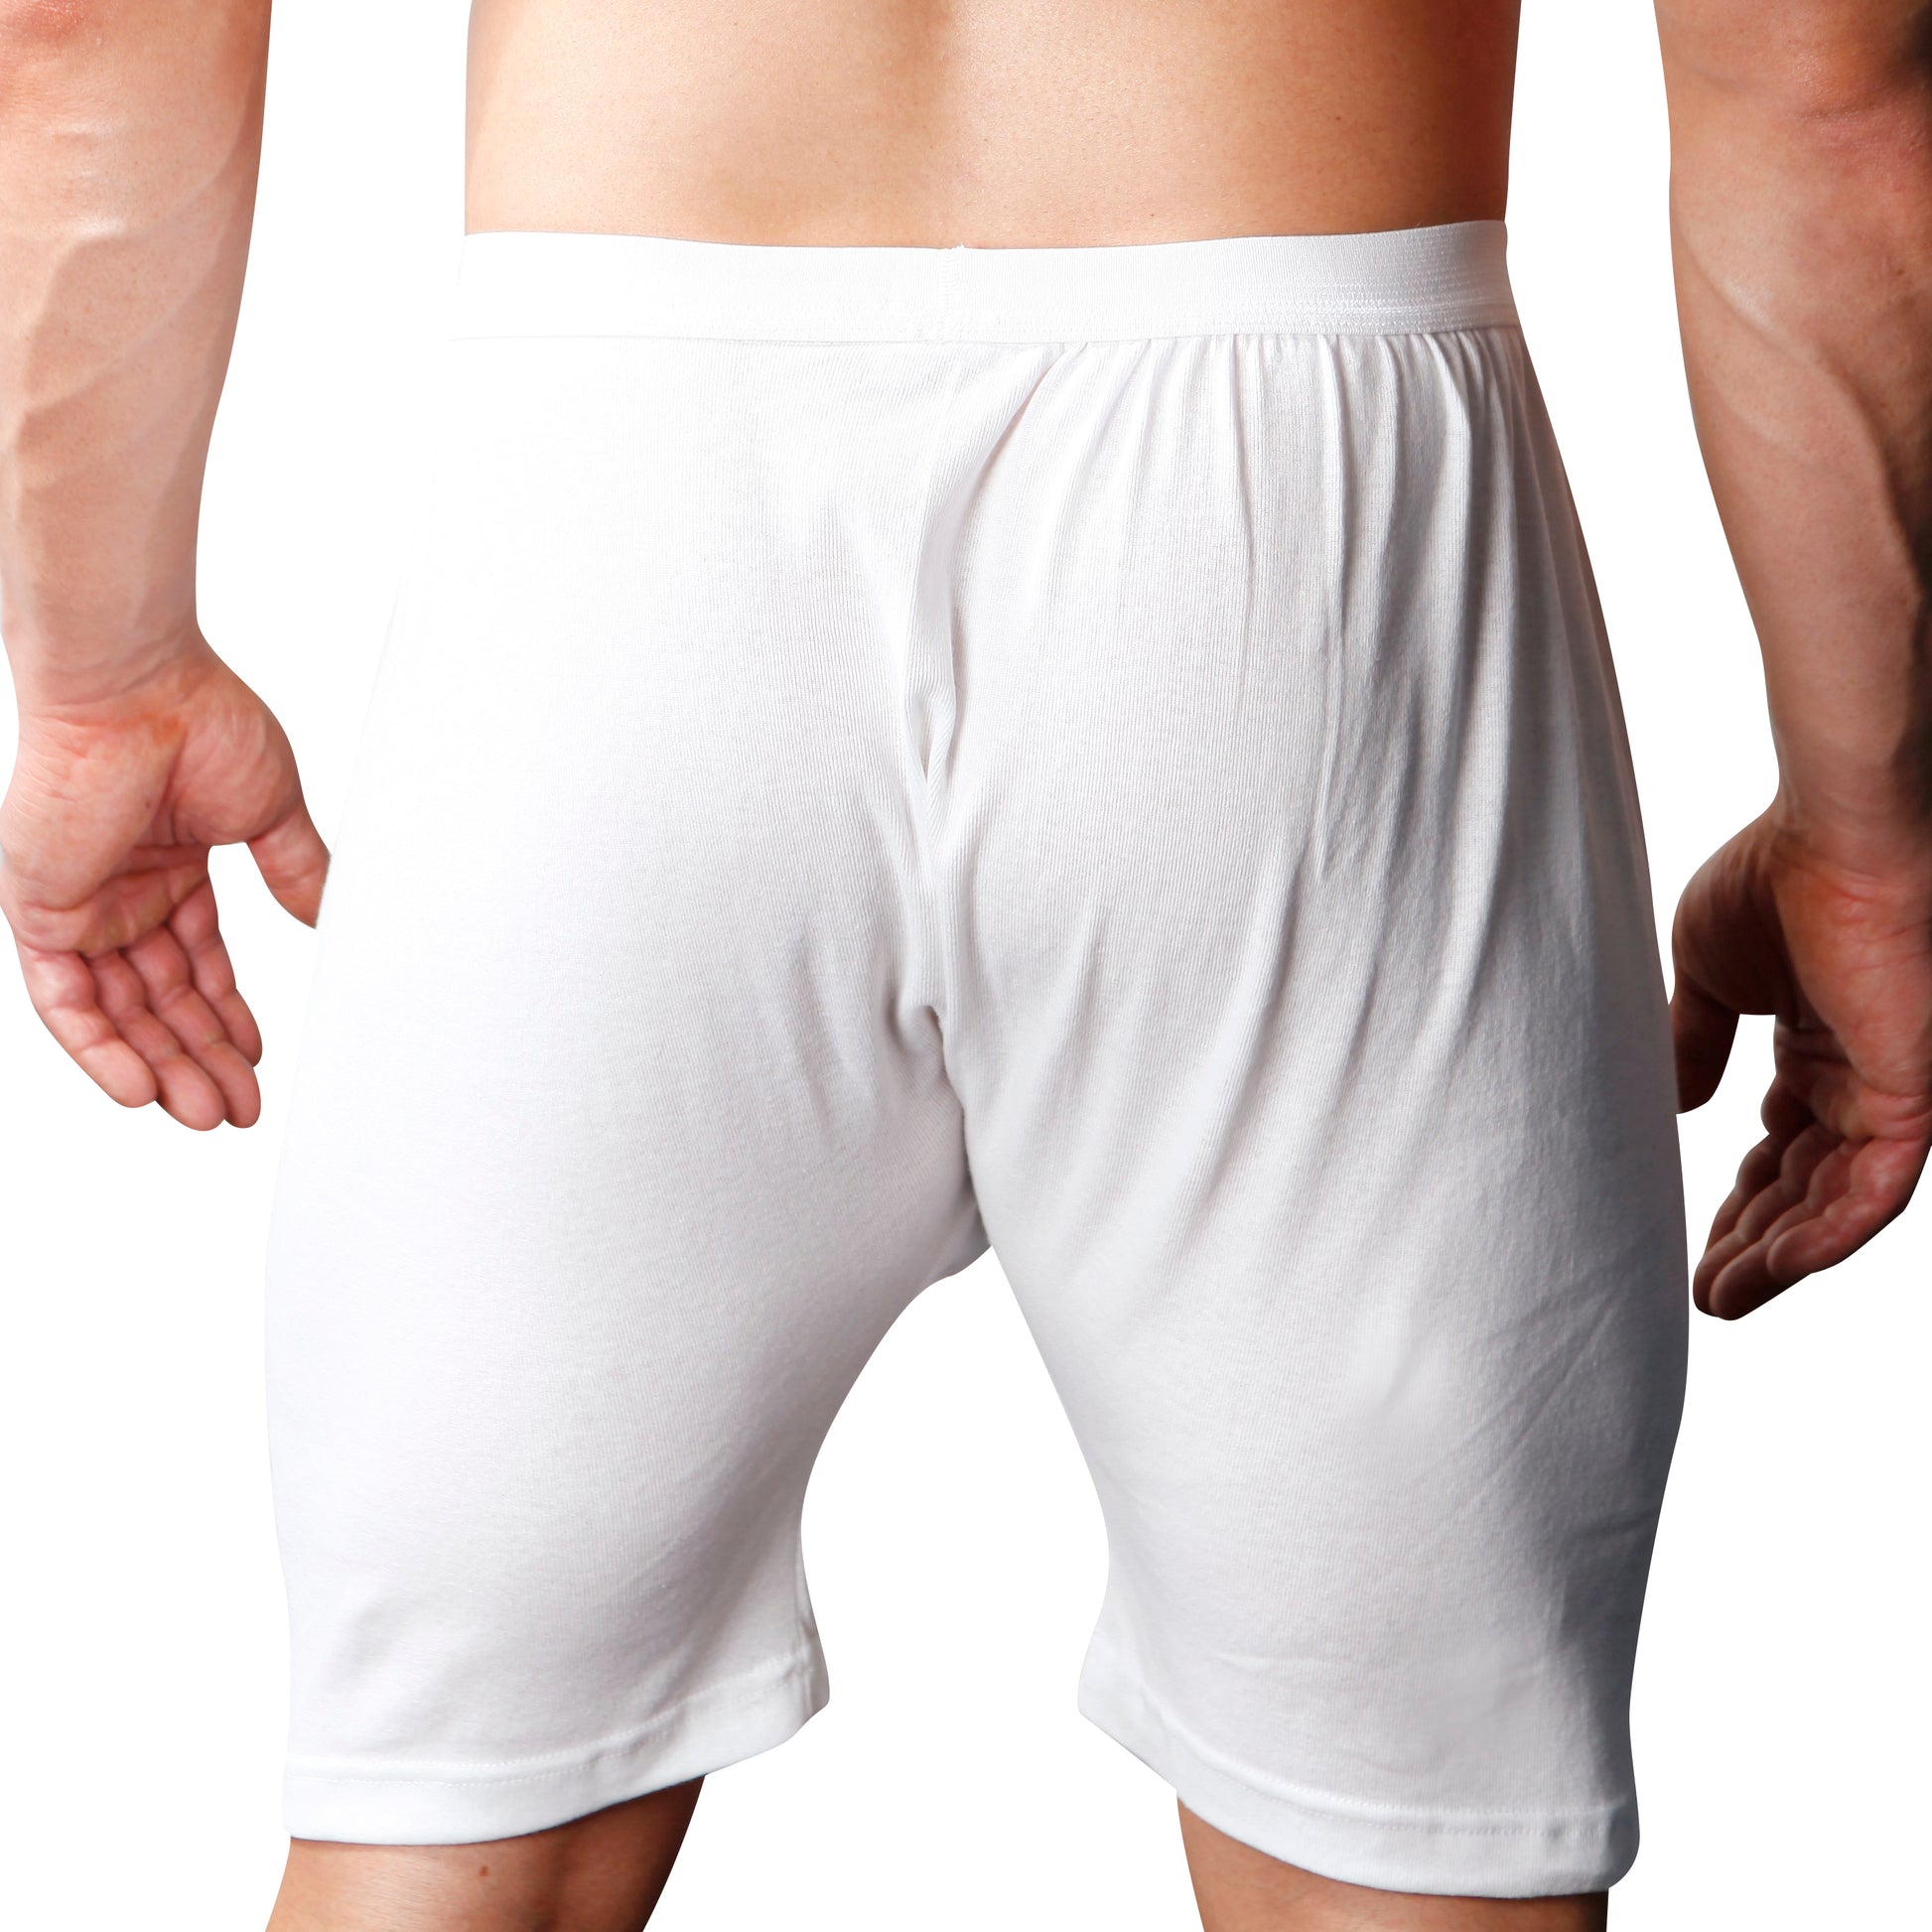 Men's Boxer Briefs Big and Tall Combed Cotton Underwear Open Fly 6-Pack